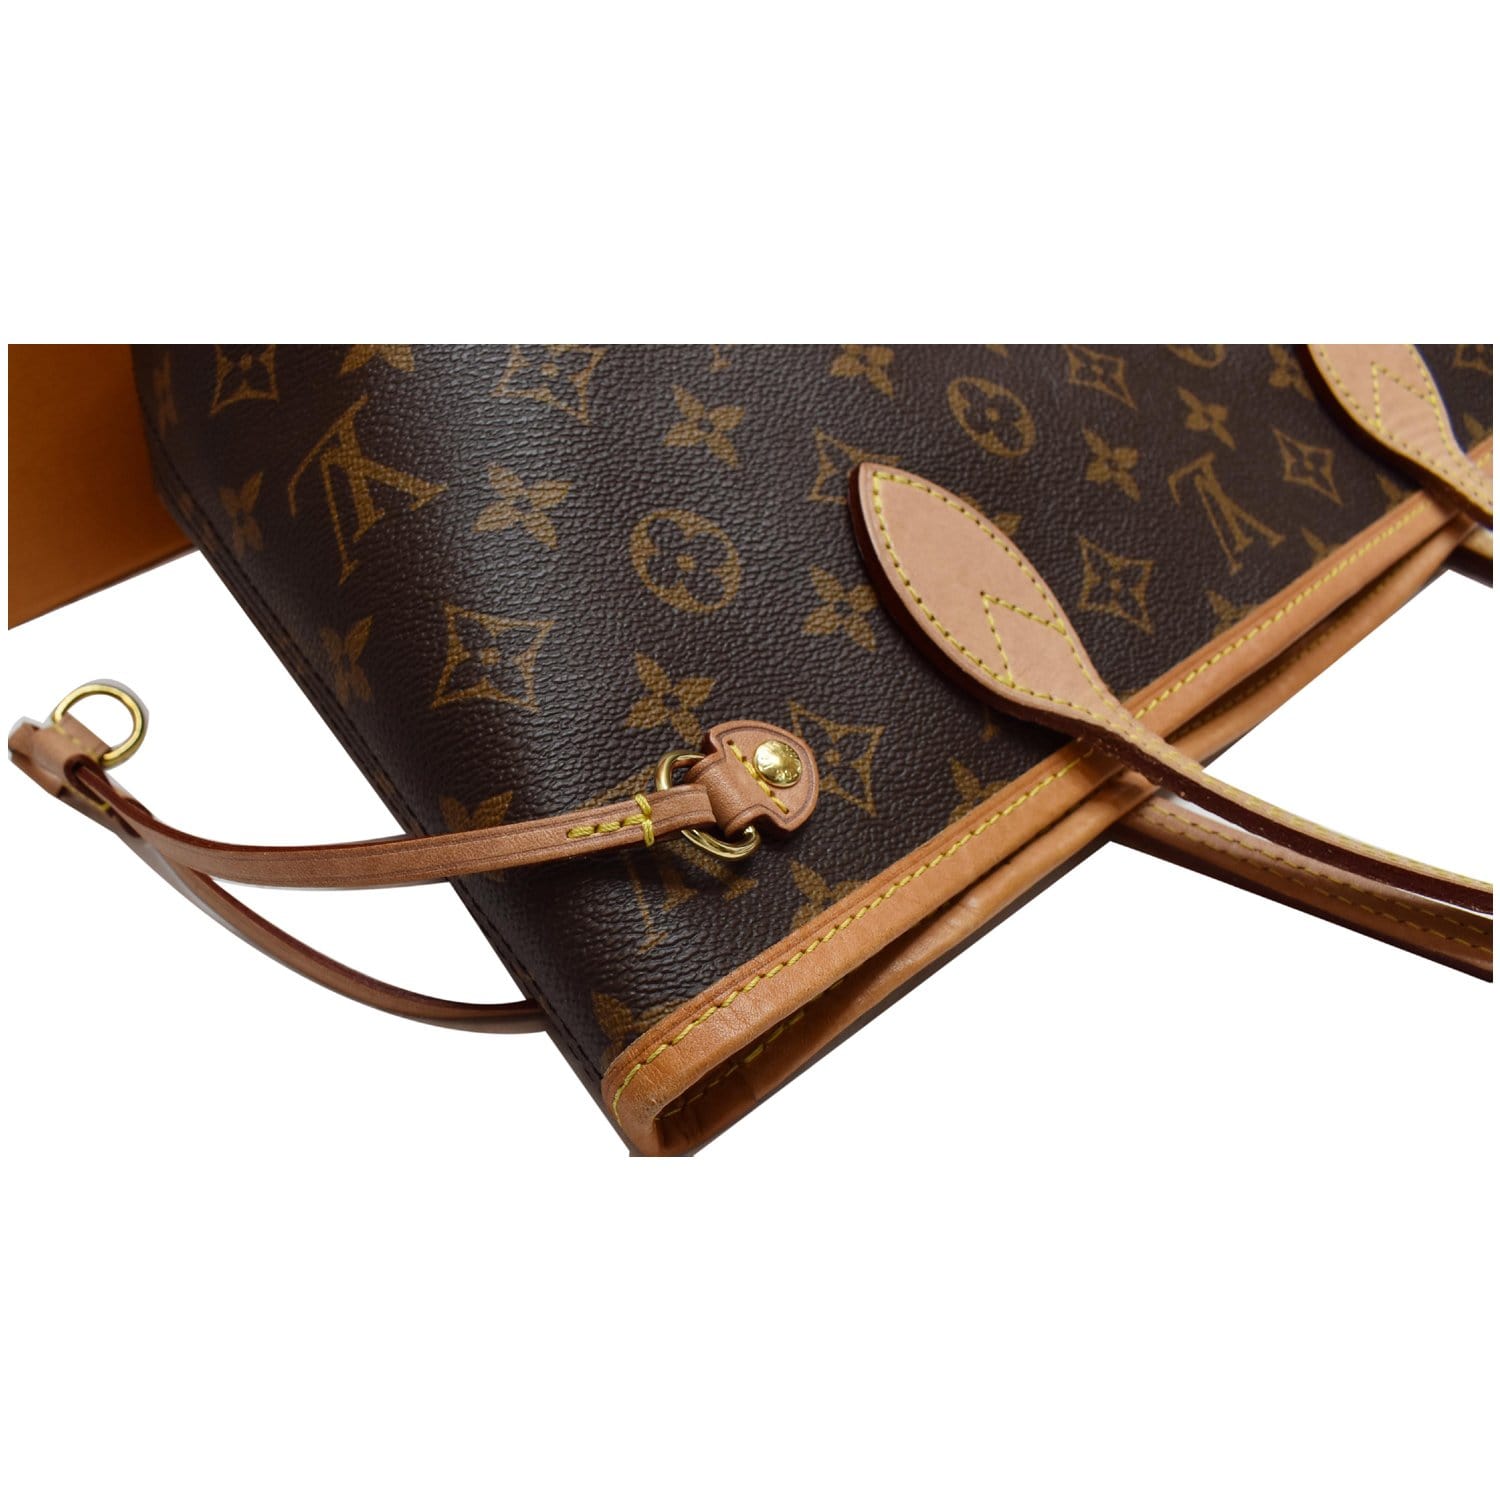 Pin by نيرڤانا on deepveer  Fashion, Louis vuitton bag neverfull